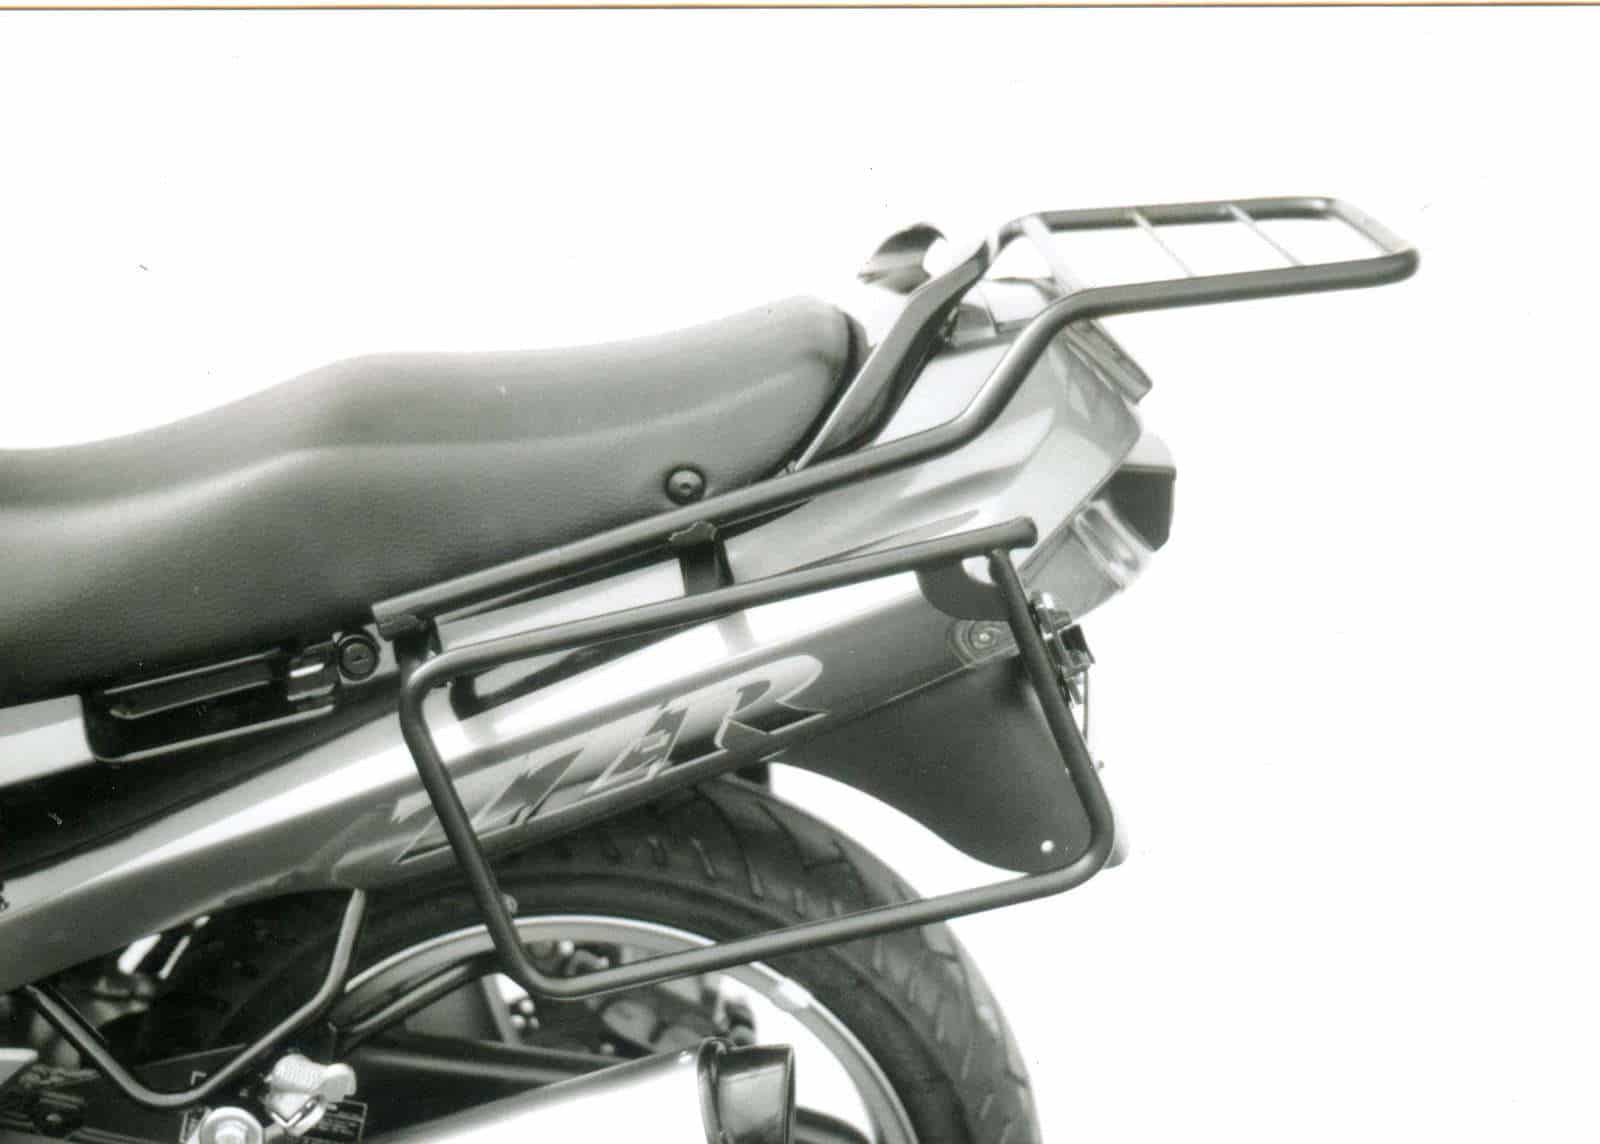 Sidecarrier permanent mounted black for Kawasaki ZZ-R 600 (1990-1992)